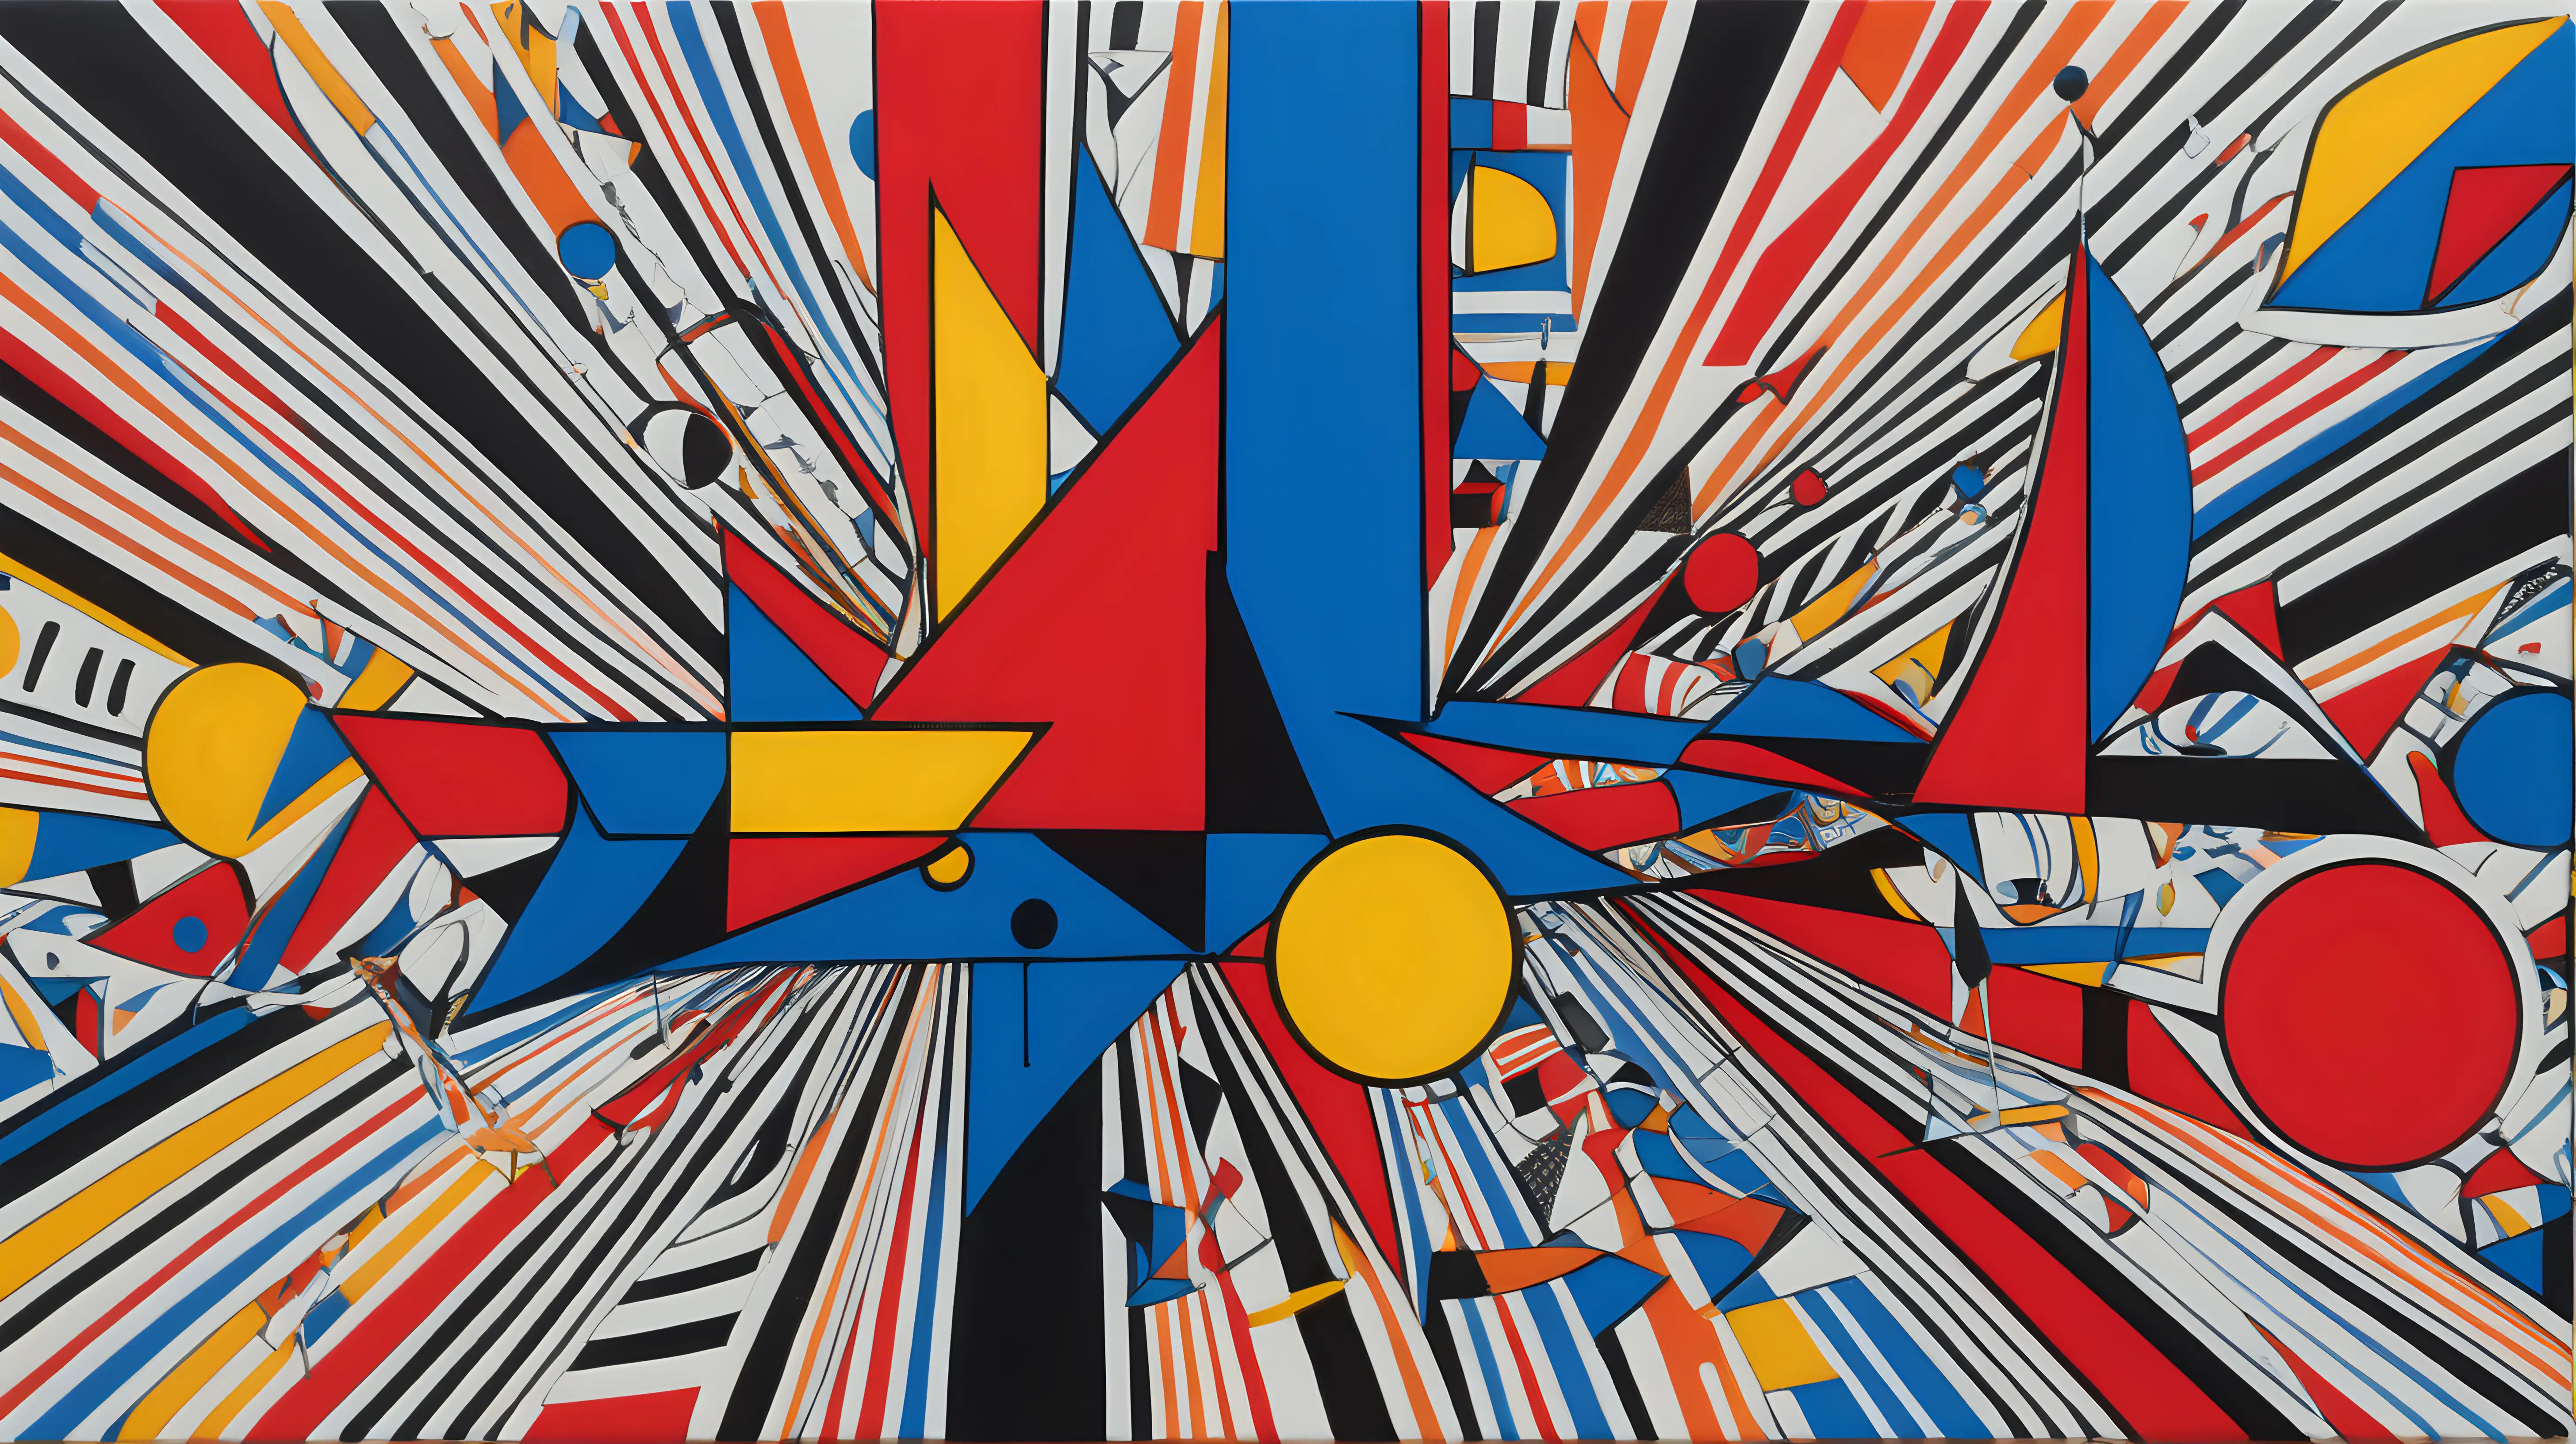 A controlled chaos of intersecting lines and shapes in bold primary colors, representing the beauty found within disorder.